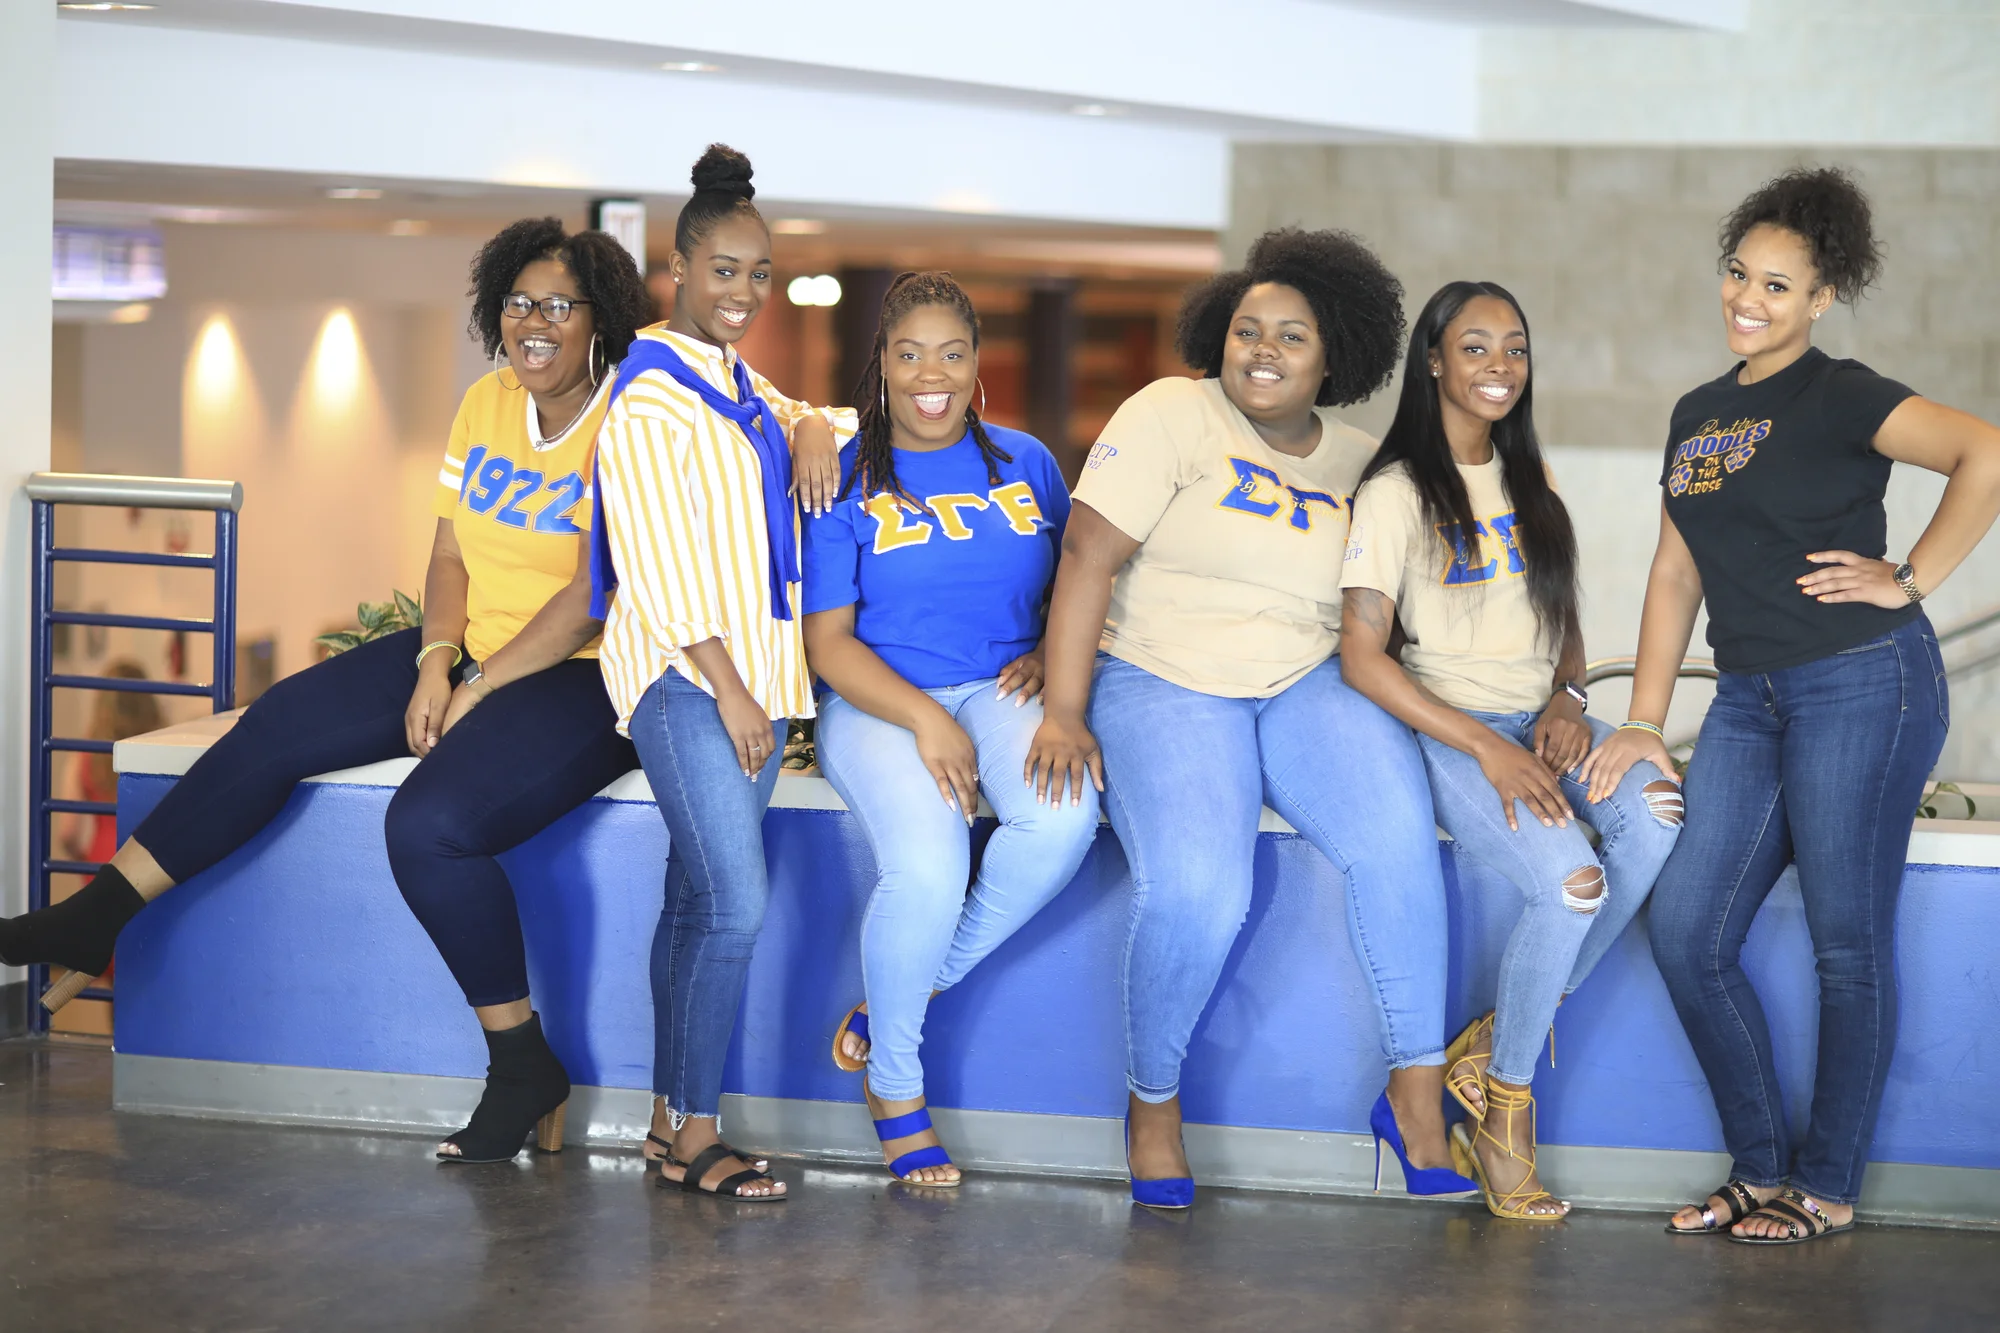 Six women in jeans and blue and yellow Sigma Gamma Rho sorority apparel